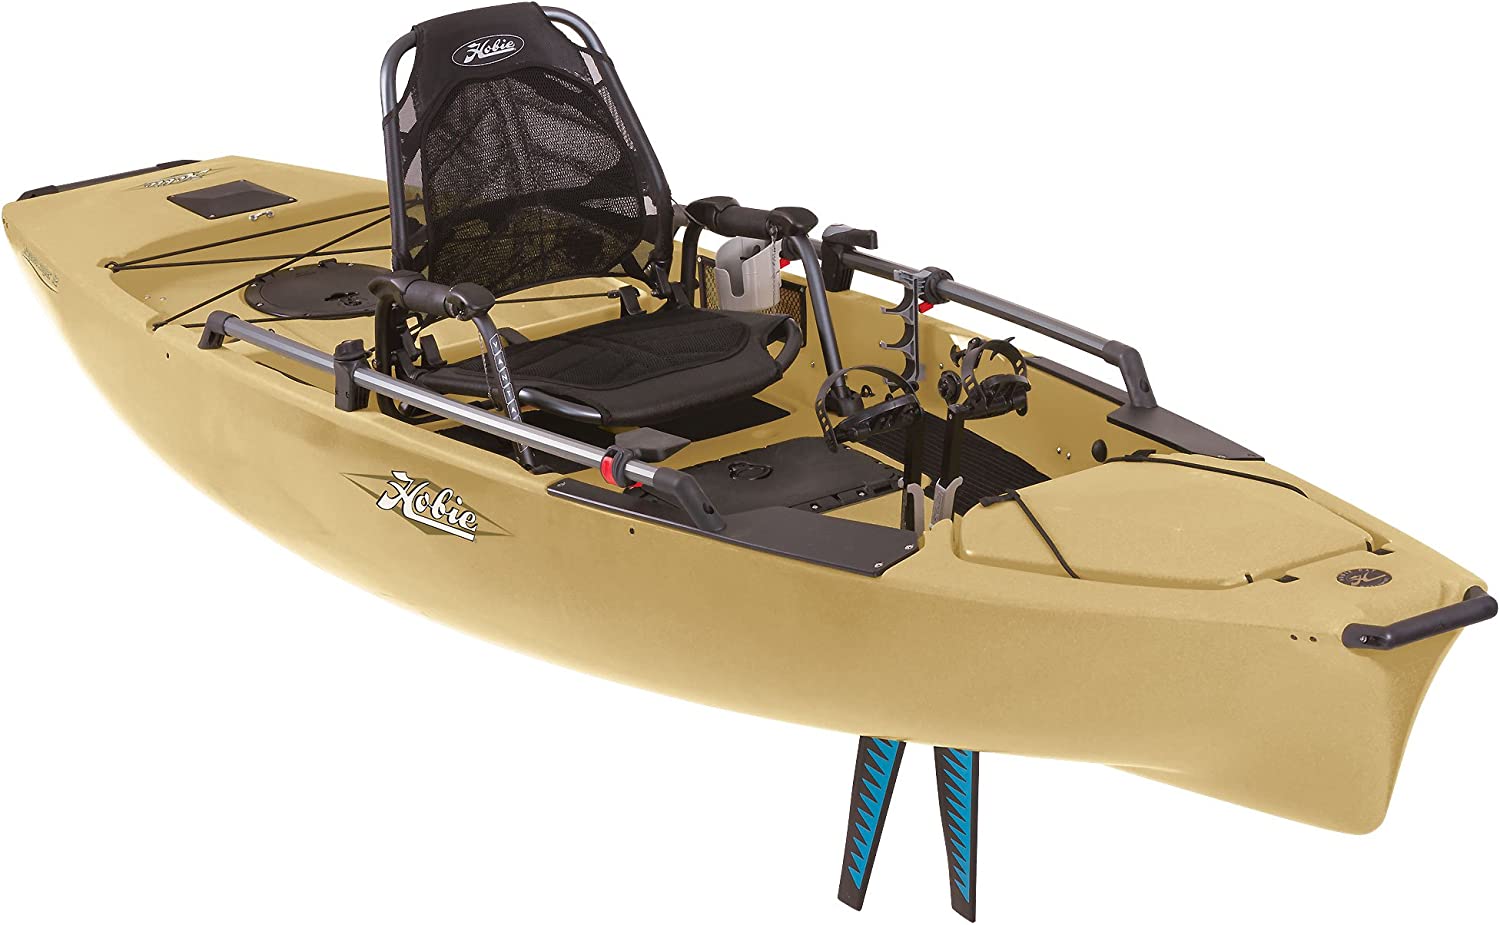 Photograph of a brown Hobie kayak with its fins visible.